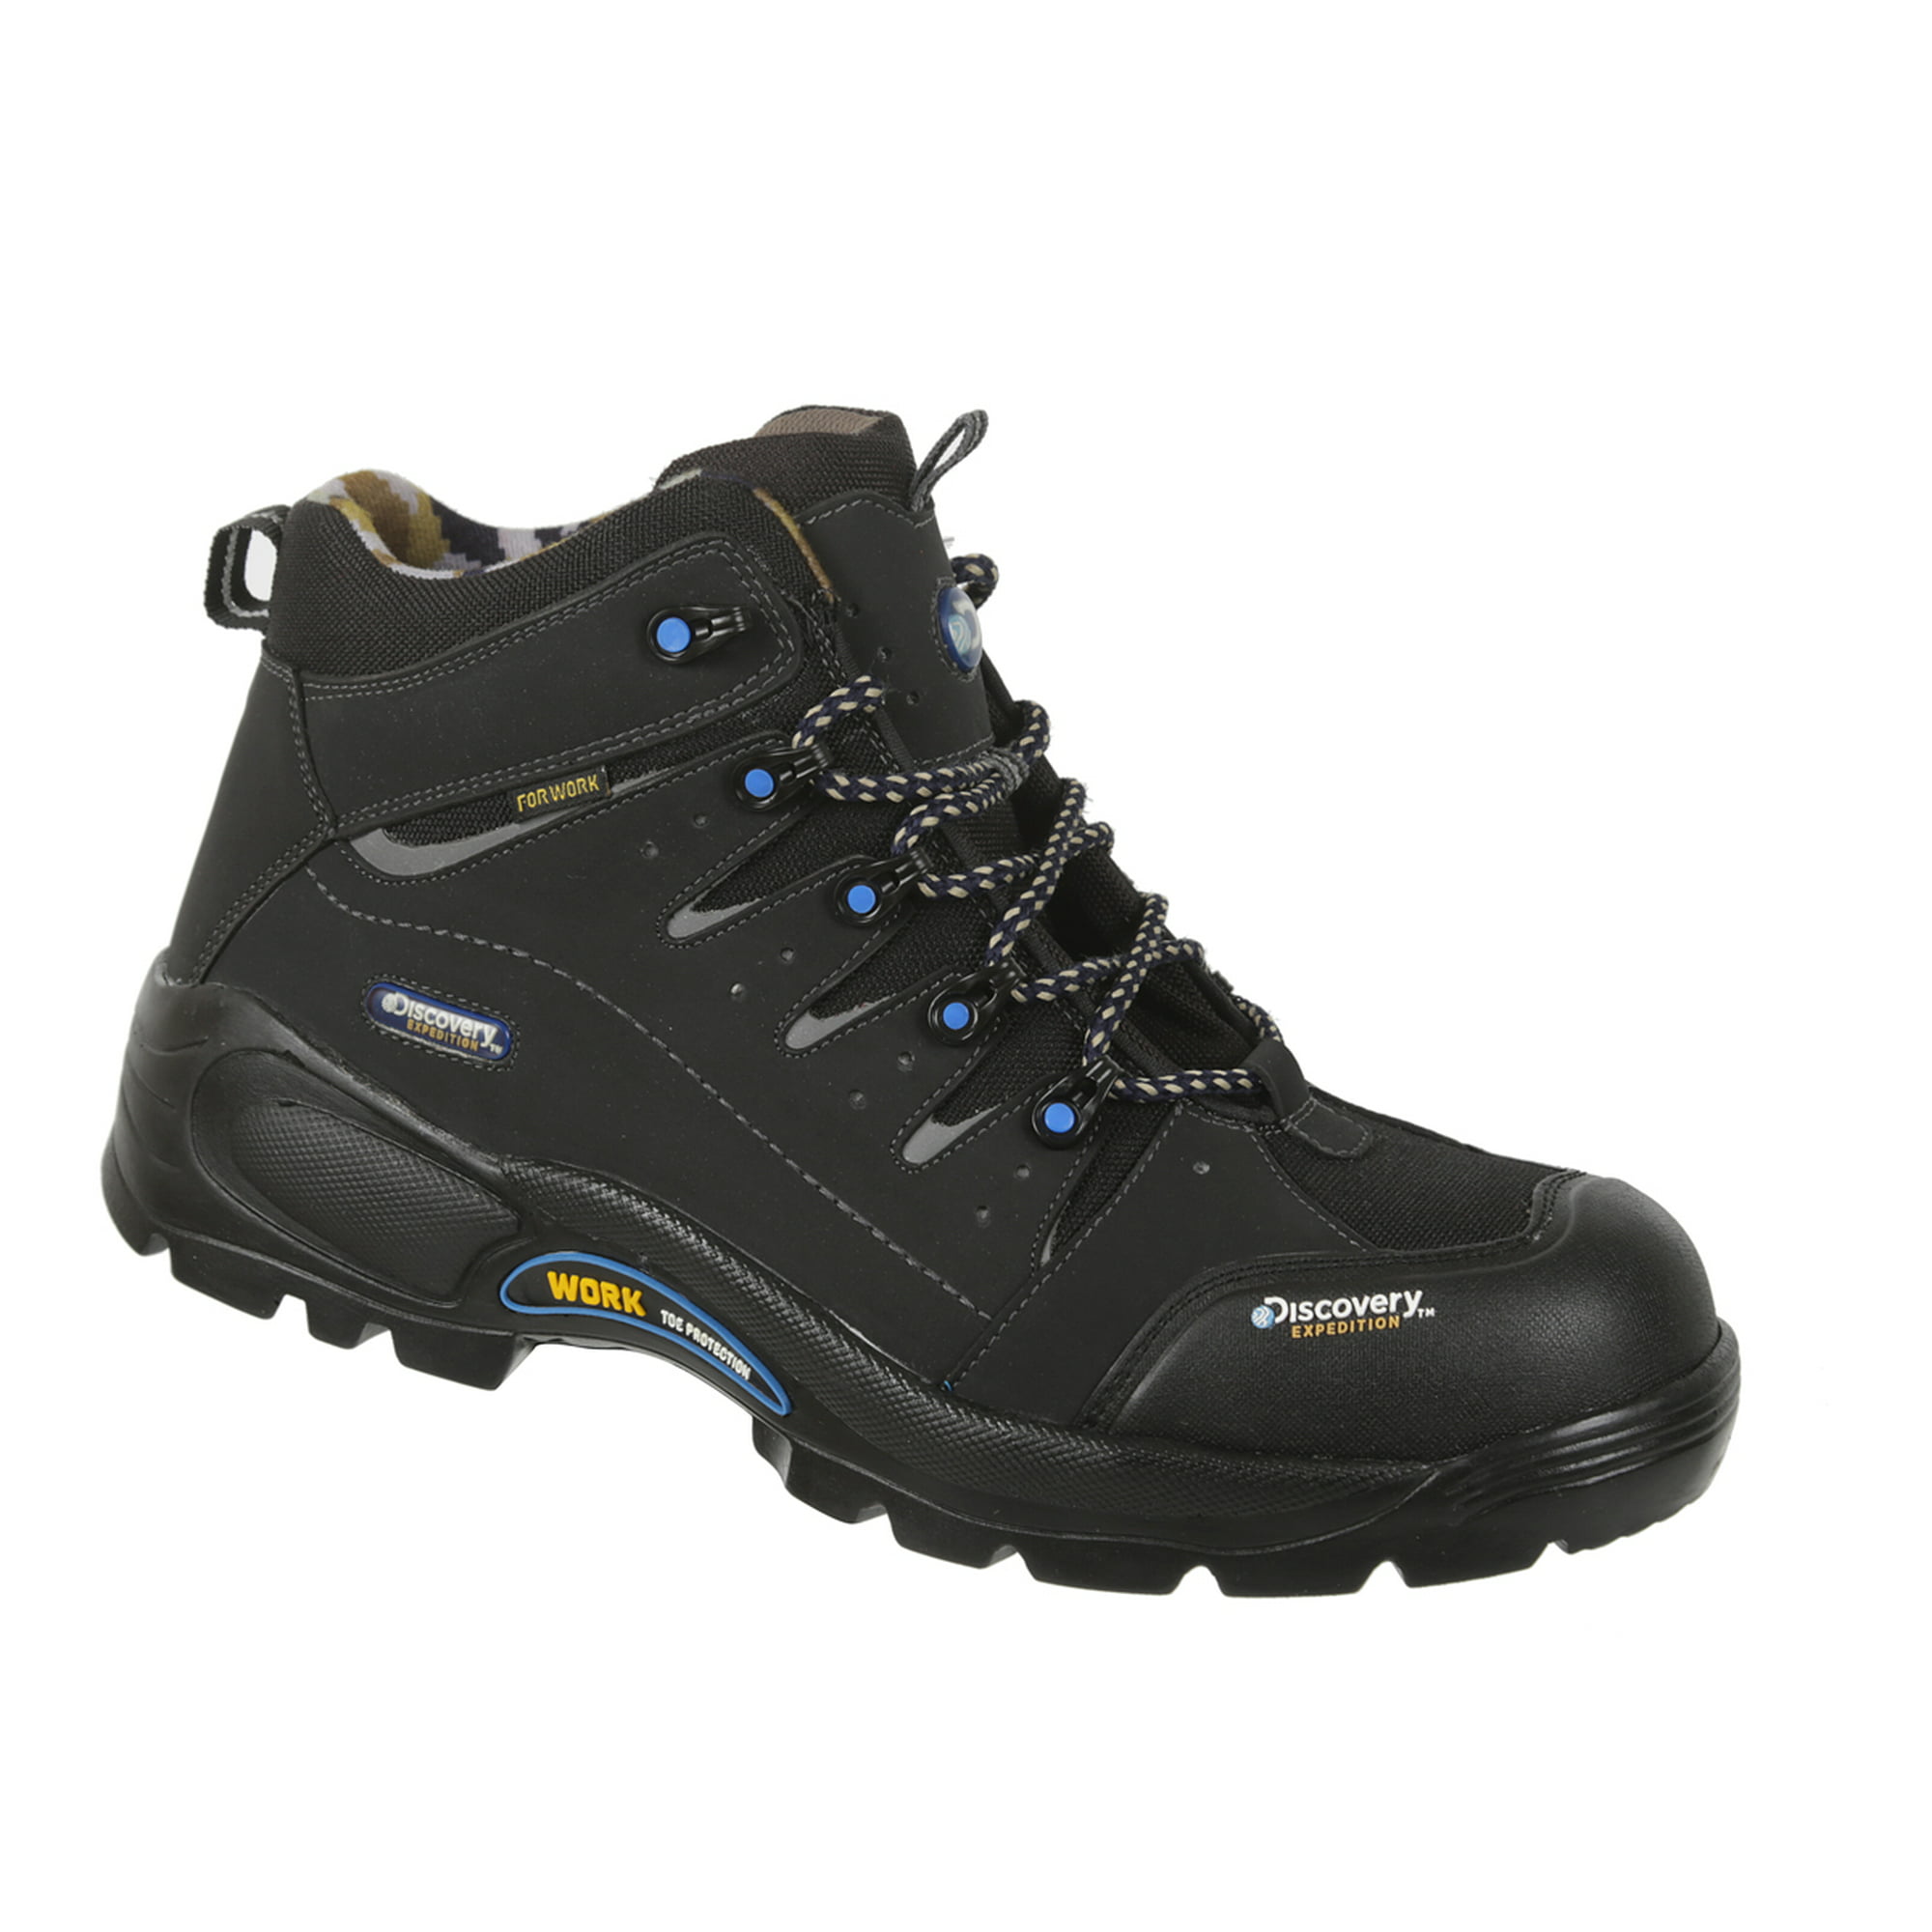 Bota industrial para hombre discovery expedition blackwood 1955 negro